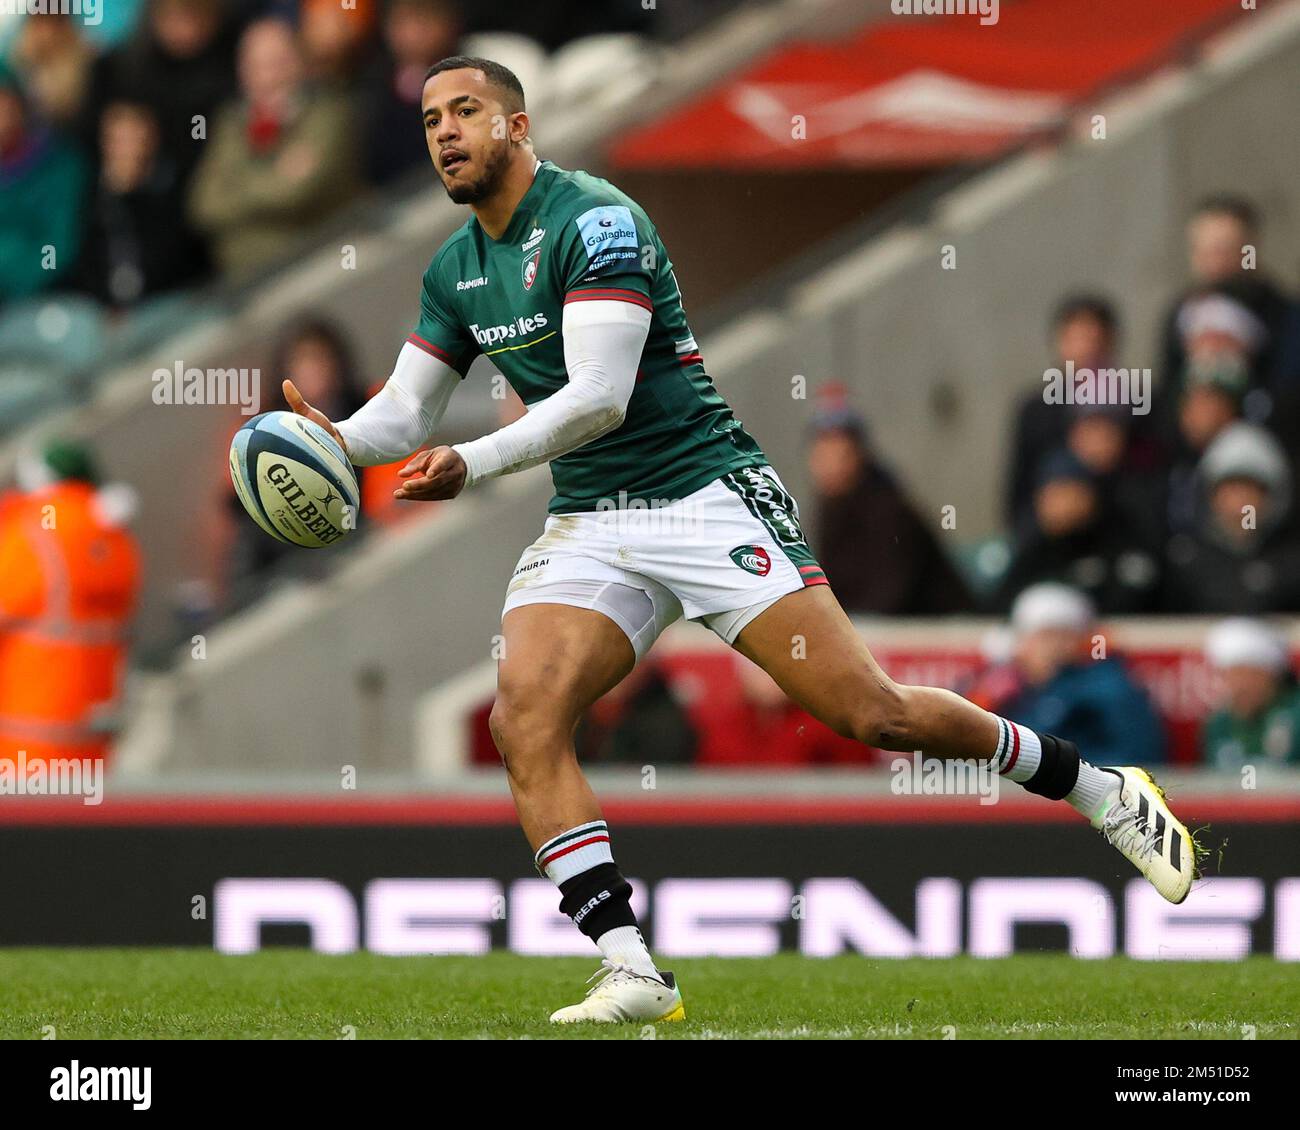 Leicester, UK. 24th Dec, 2022. Anthony Watson of Leicester Tigers